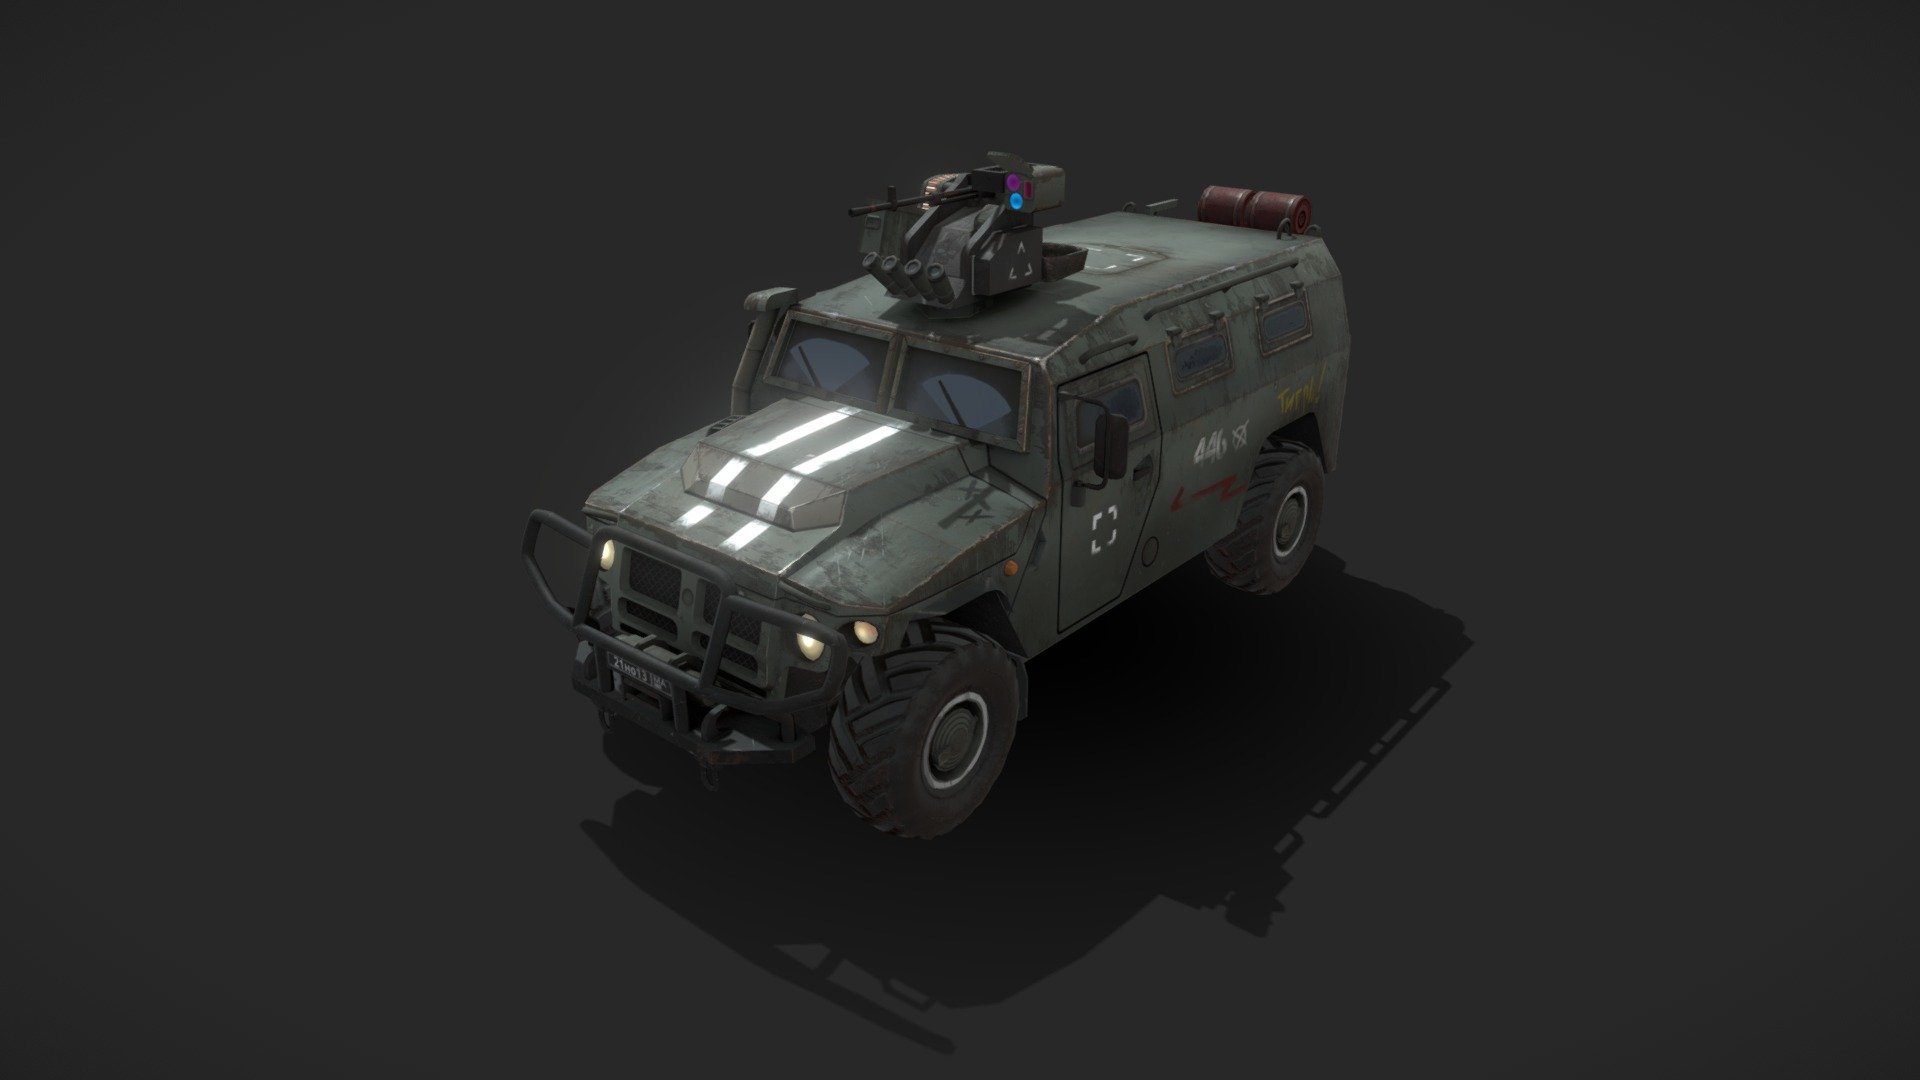 GAZ Tigr (Russian: ГАЗ Тигр) is a scout and reconaissance vehicle and a direct equivalent of the US Humvee.

If you like this model and love gaming assets, check out my profile for more game-ready low-poly content - GAZ Tigr Armored Car - Buy Royalty Free 3D model by spacelynxcanfly 3d model